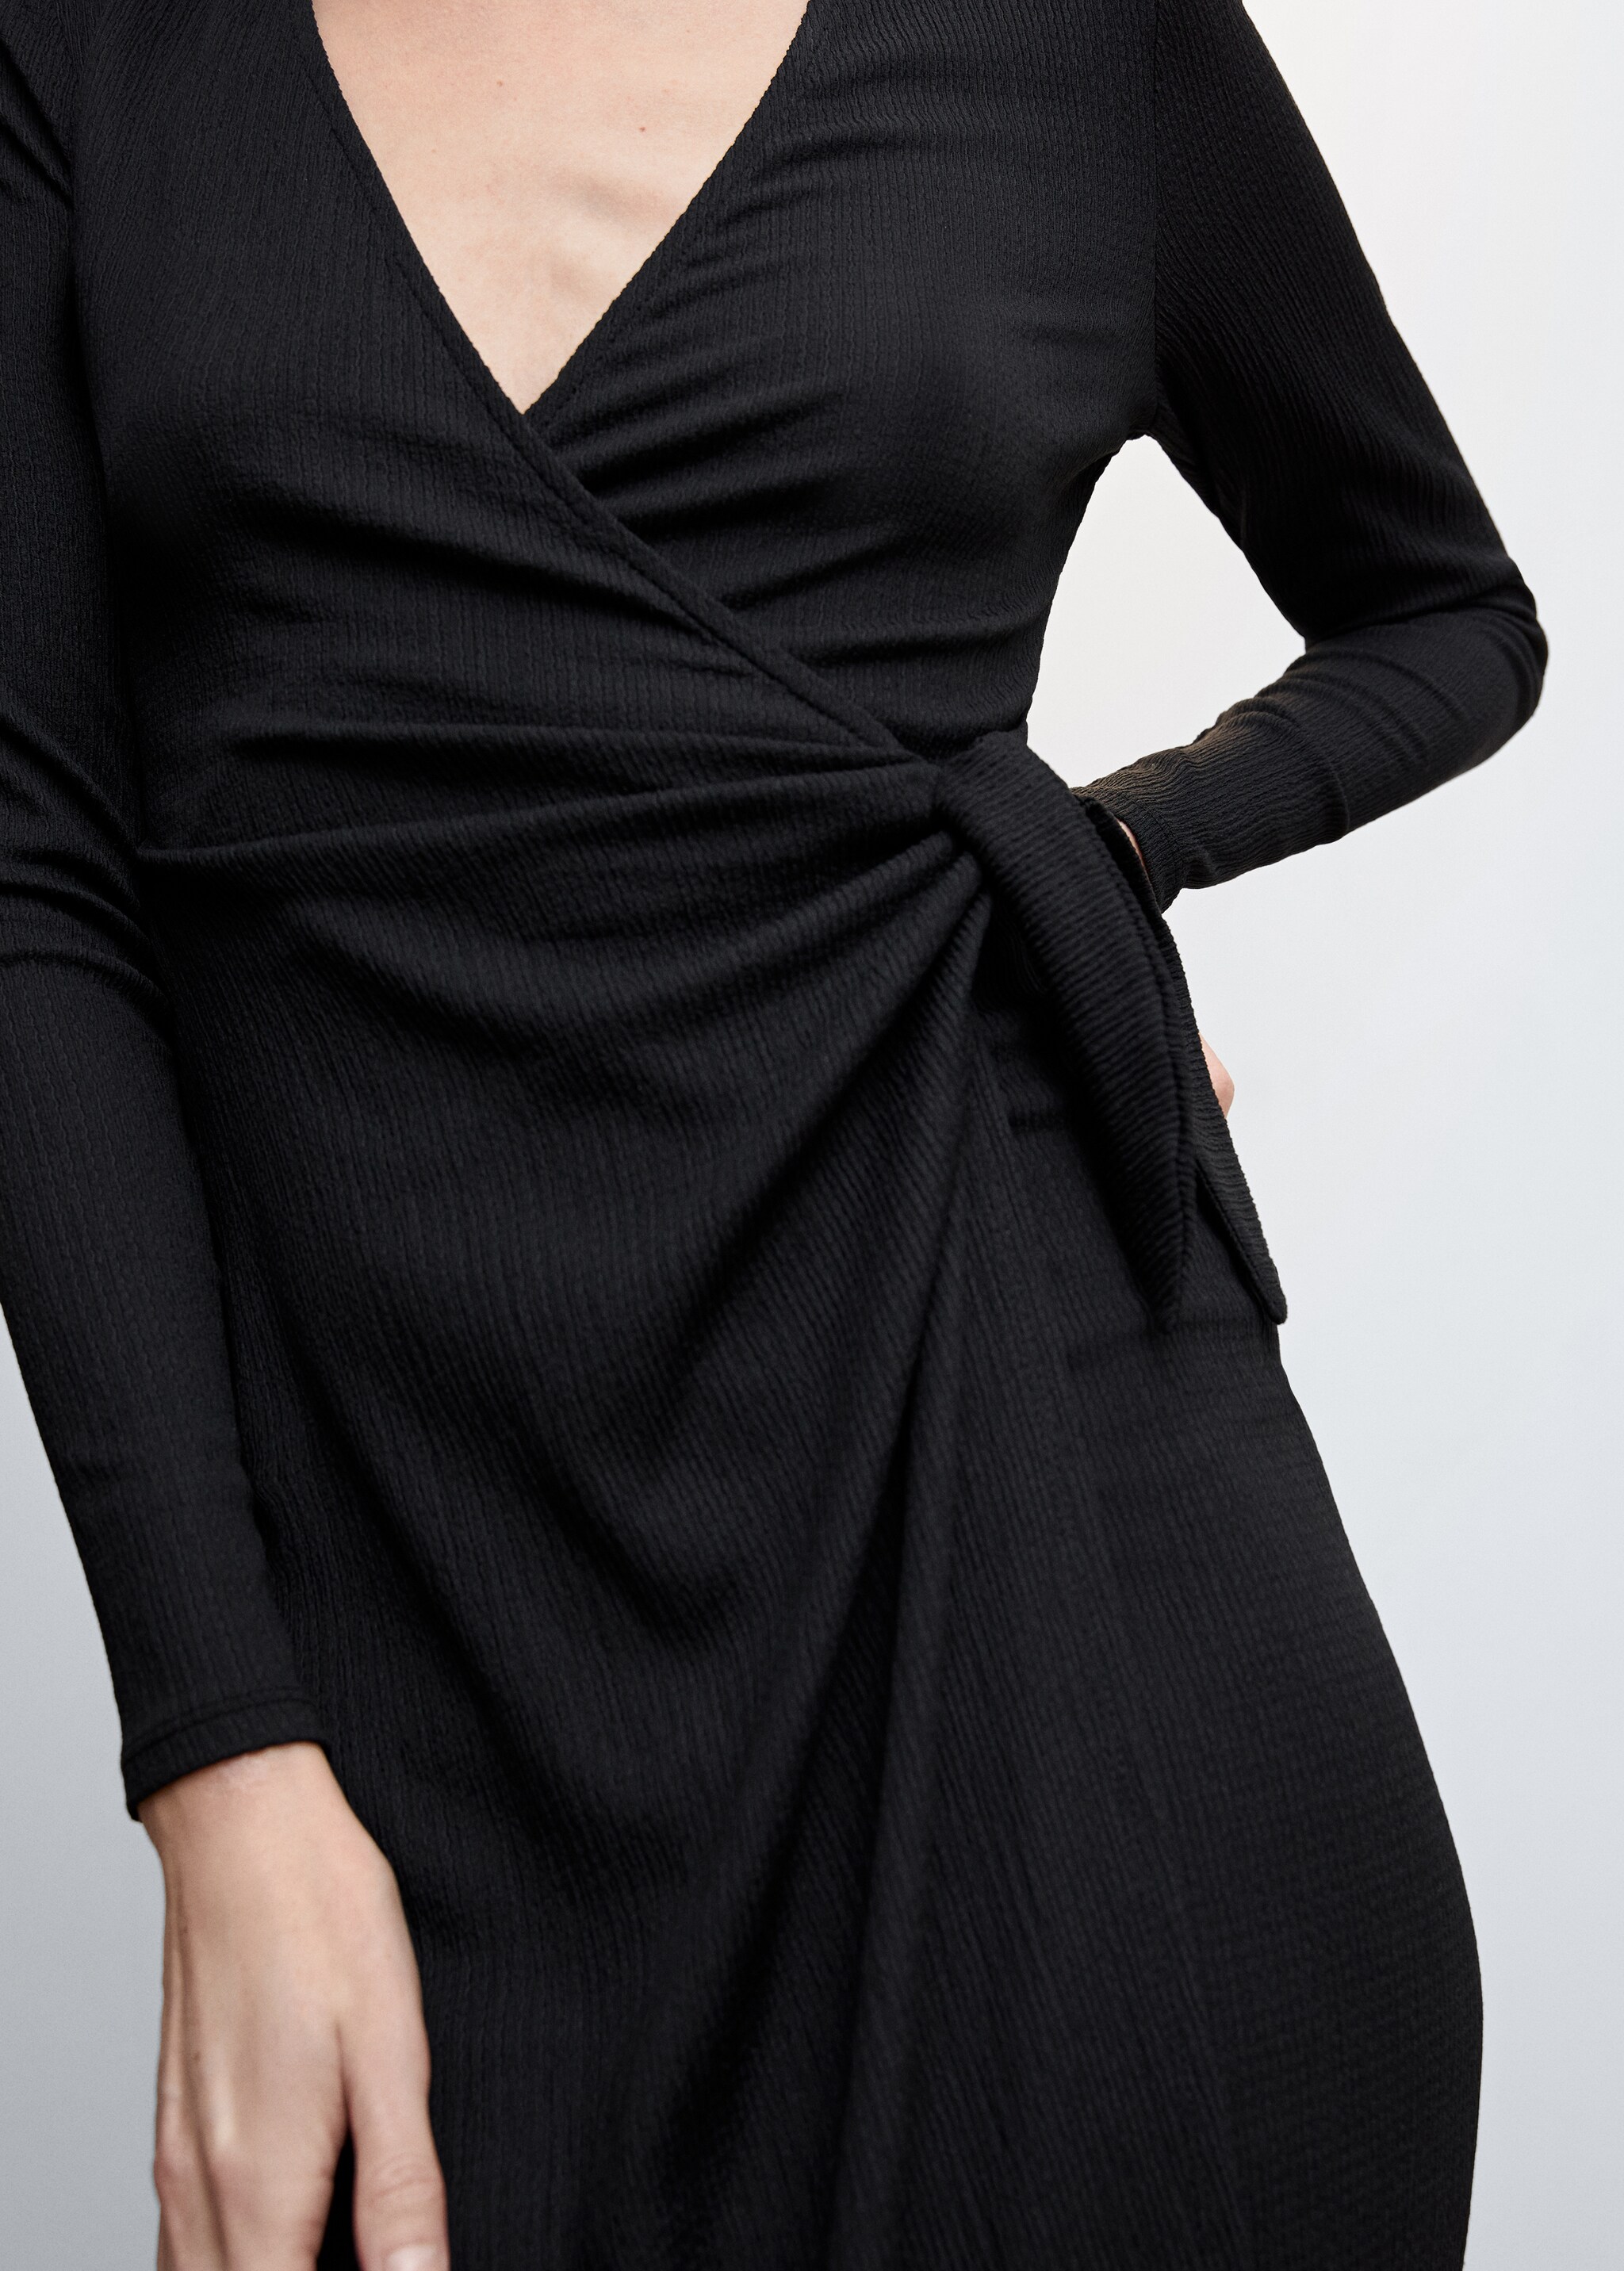 Bow wrap dress - Details of the article 6